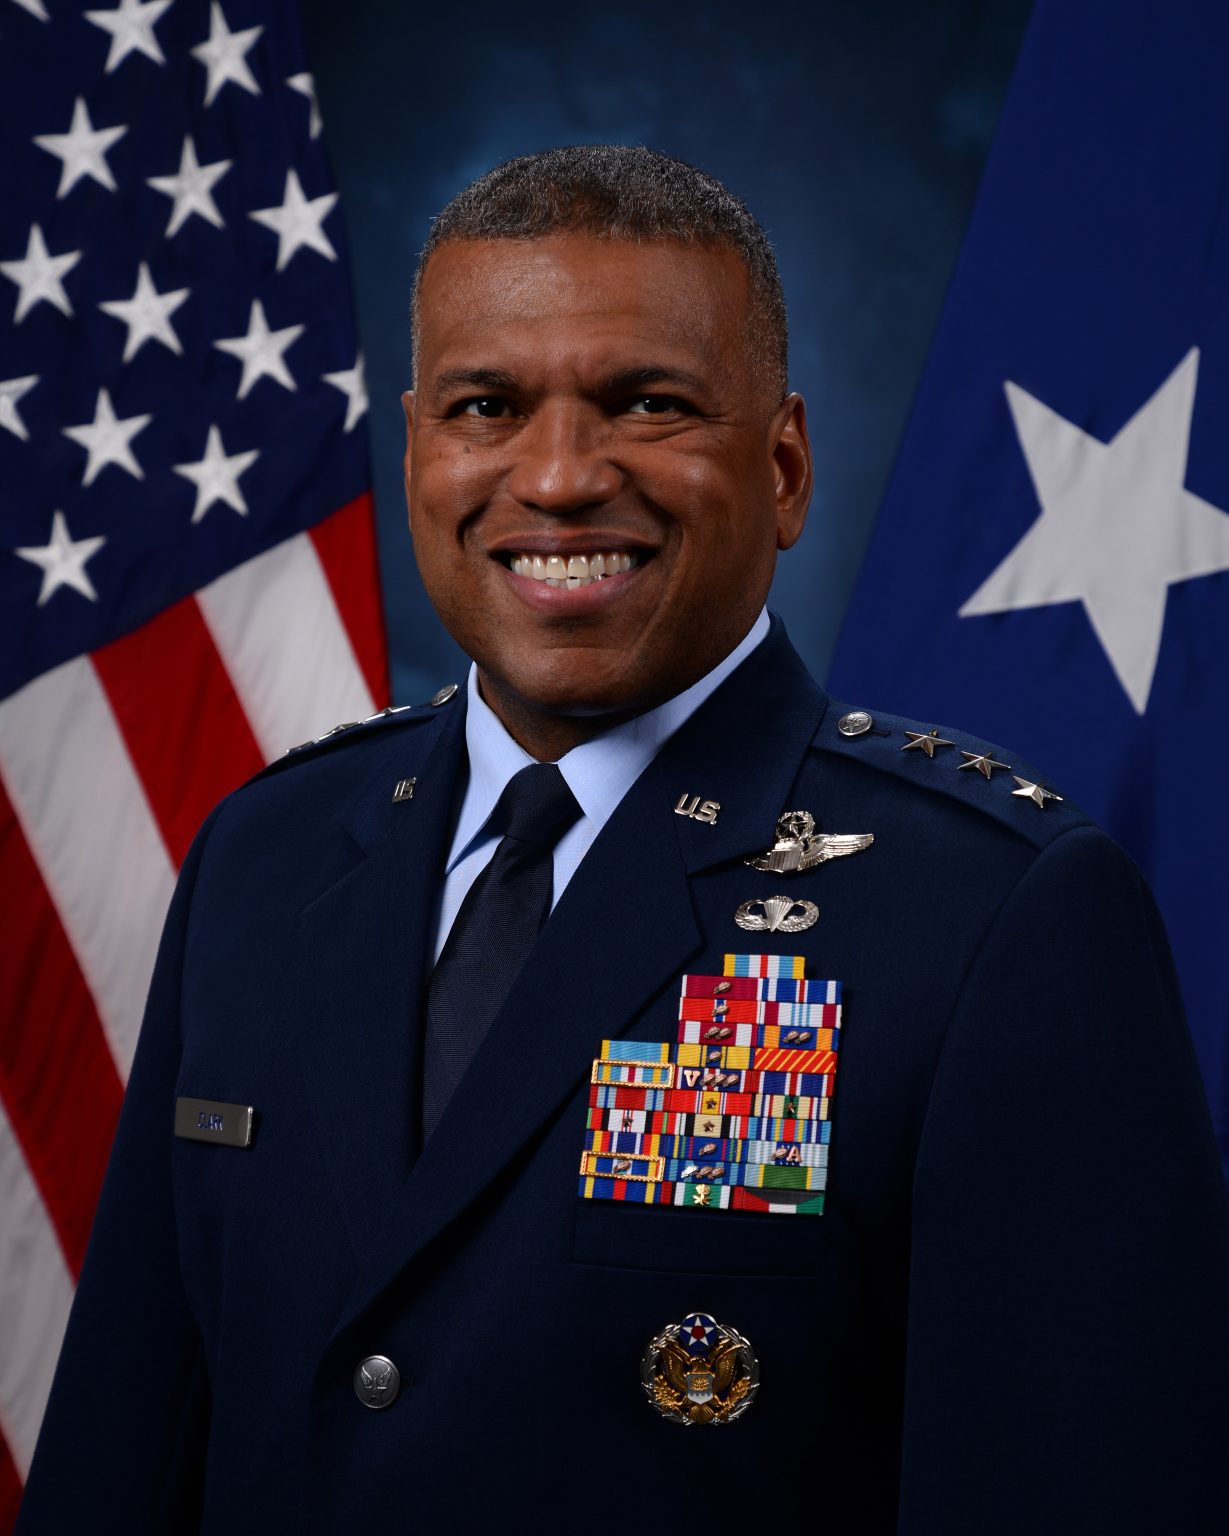 USAFA Superintendent Lt General Clark Is A Liar, Must Be Removed, Face Court-Martial For Treason